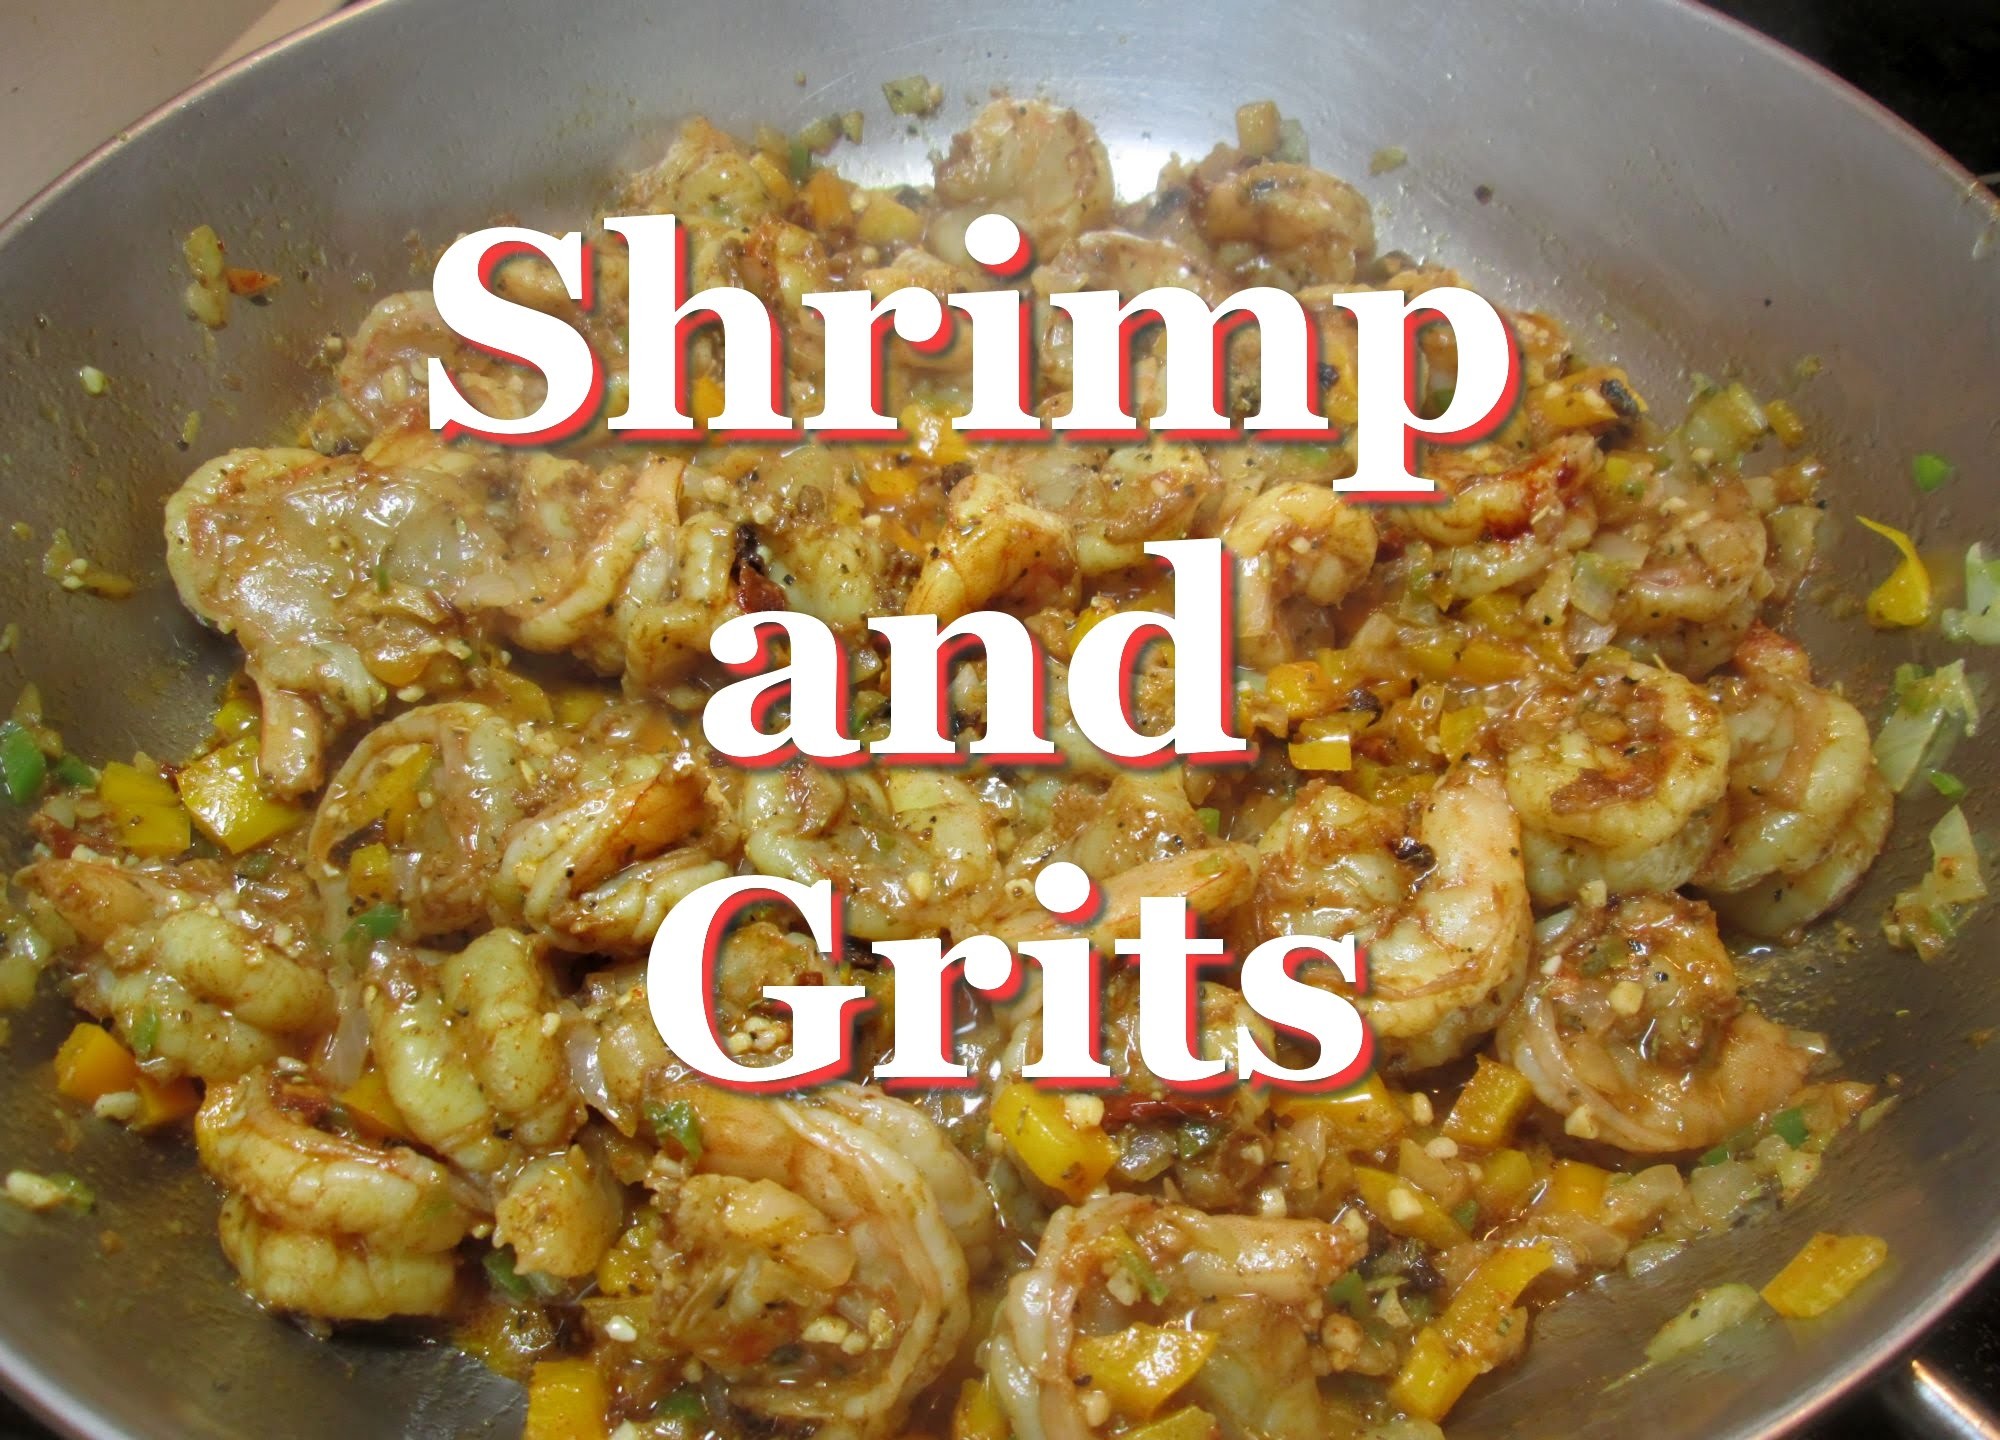 Spicy Cajun Shrimp and Grits Recipe ~How to Make Shrimp & Grits